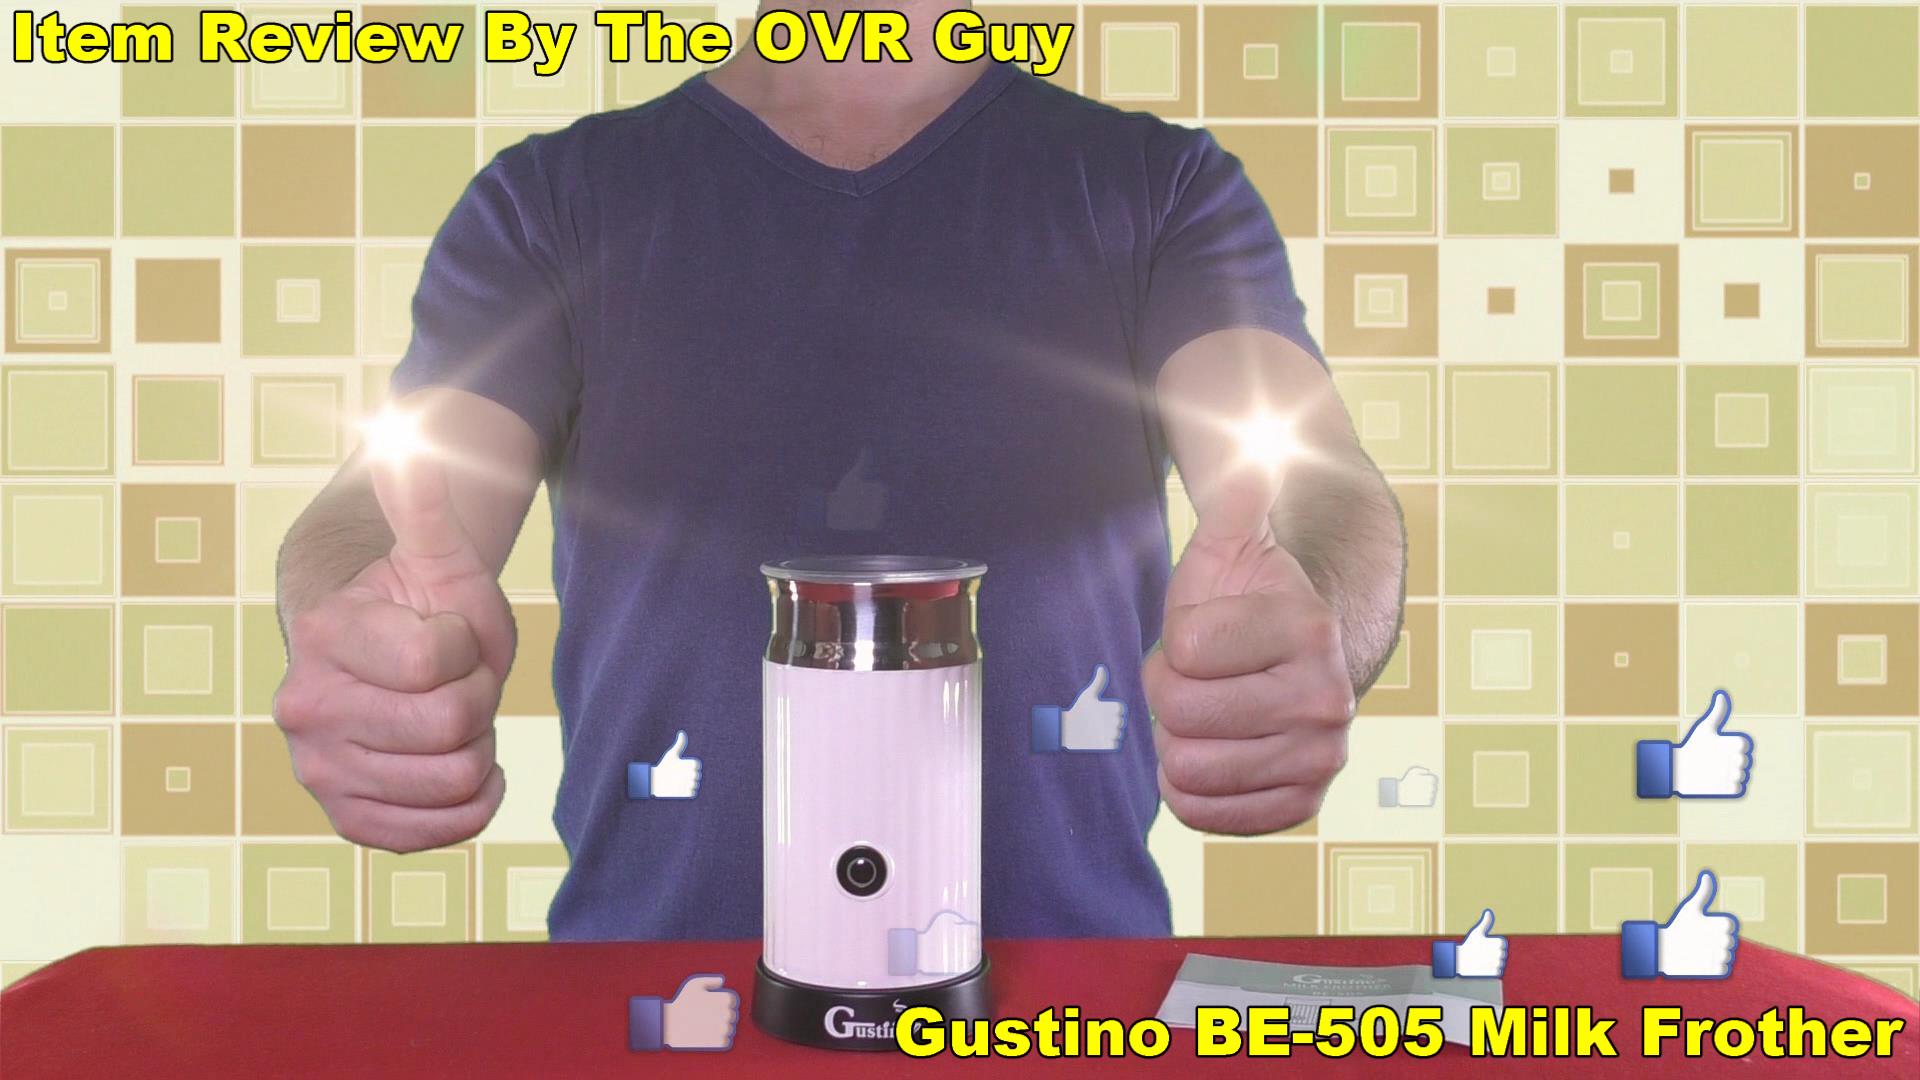 Gustino BE-505 Milk Frother (Review) - Original Video Reviews